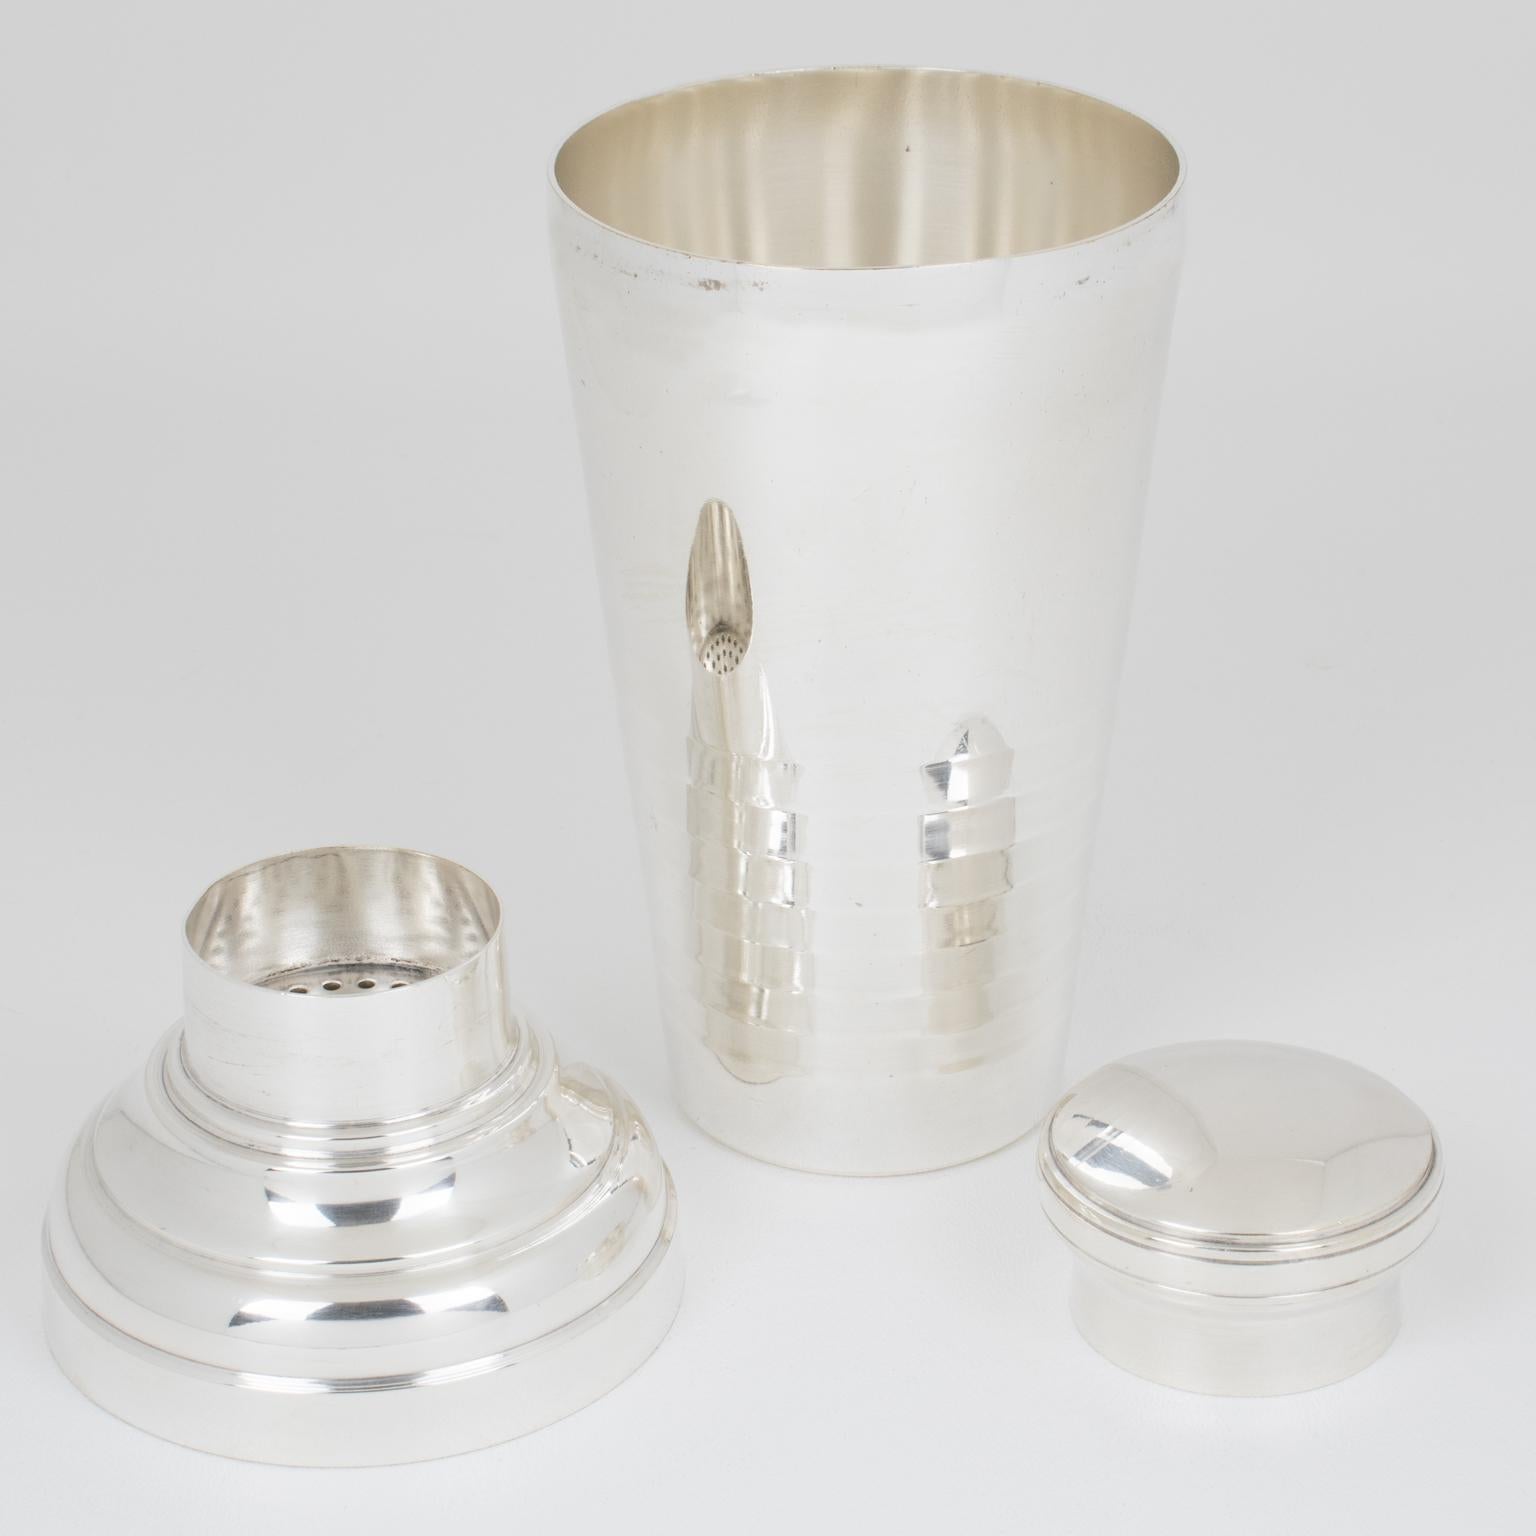 Mid-20th Century Art Deco Barware Silver Plate Cocktail Shaker, Eight Glasses and Tray Set, 1940s For Sale